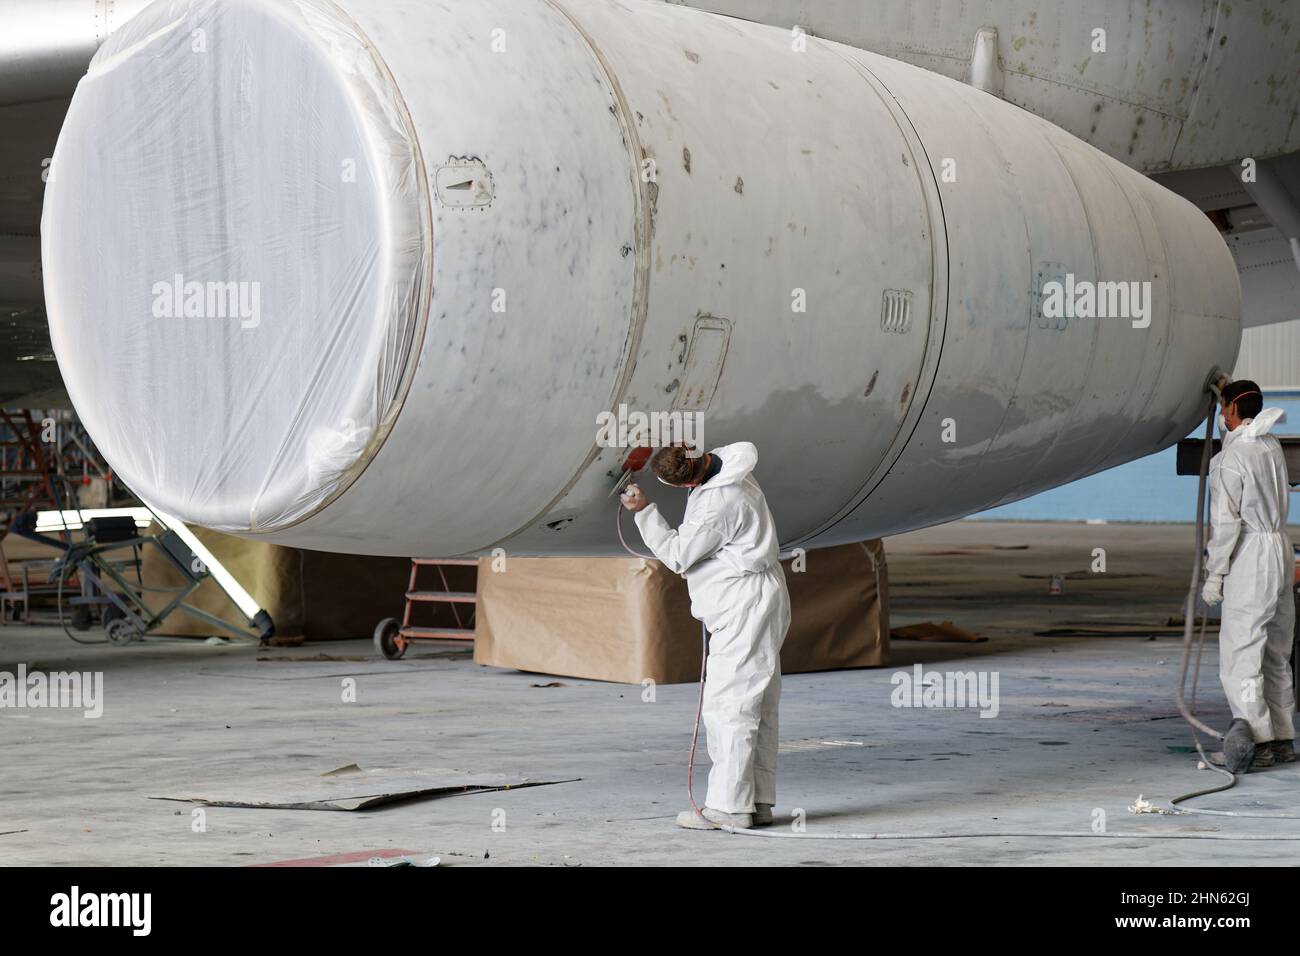 Ulyanovsk, Russia - August 15, 2015: Repair, service, modernization and painting of airplane at the aviation factory, Stock Photo